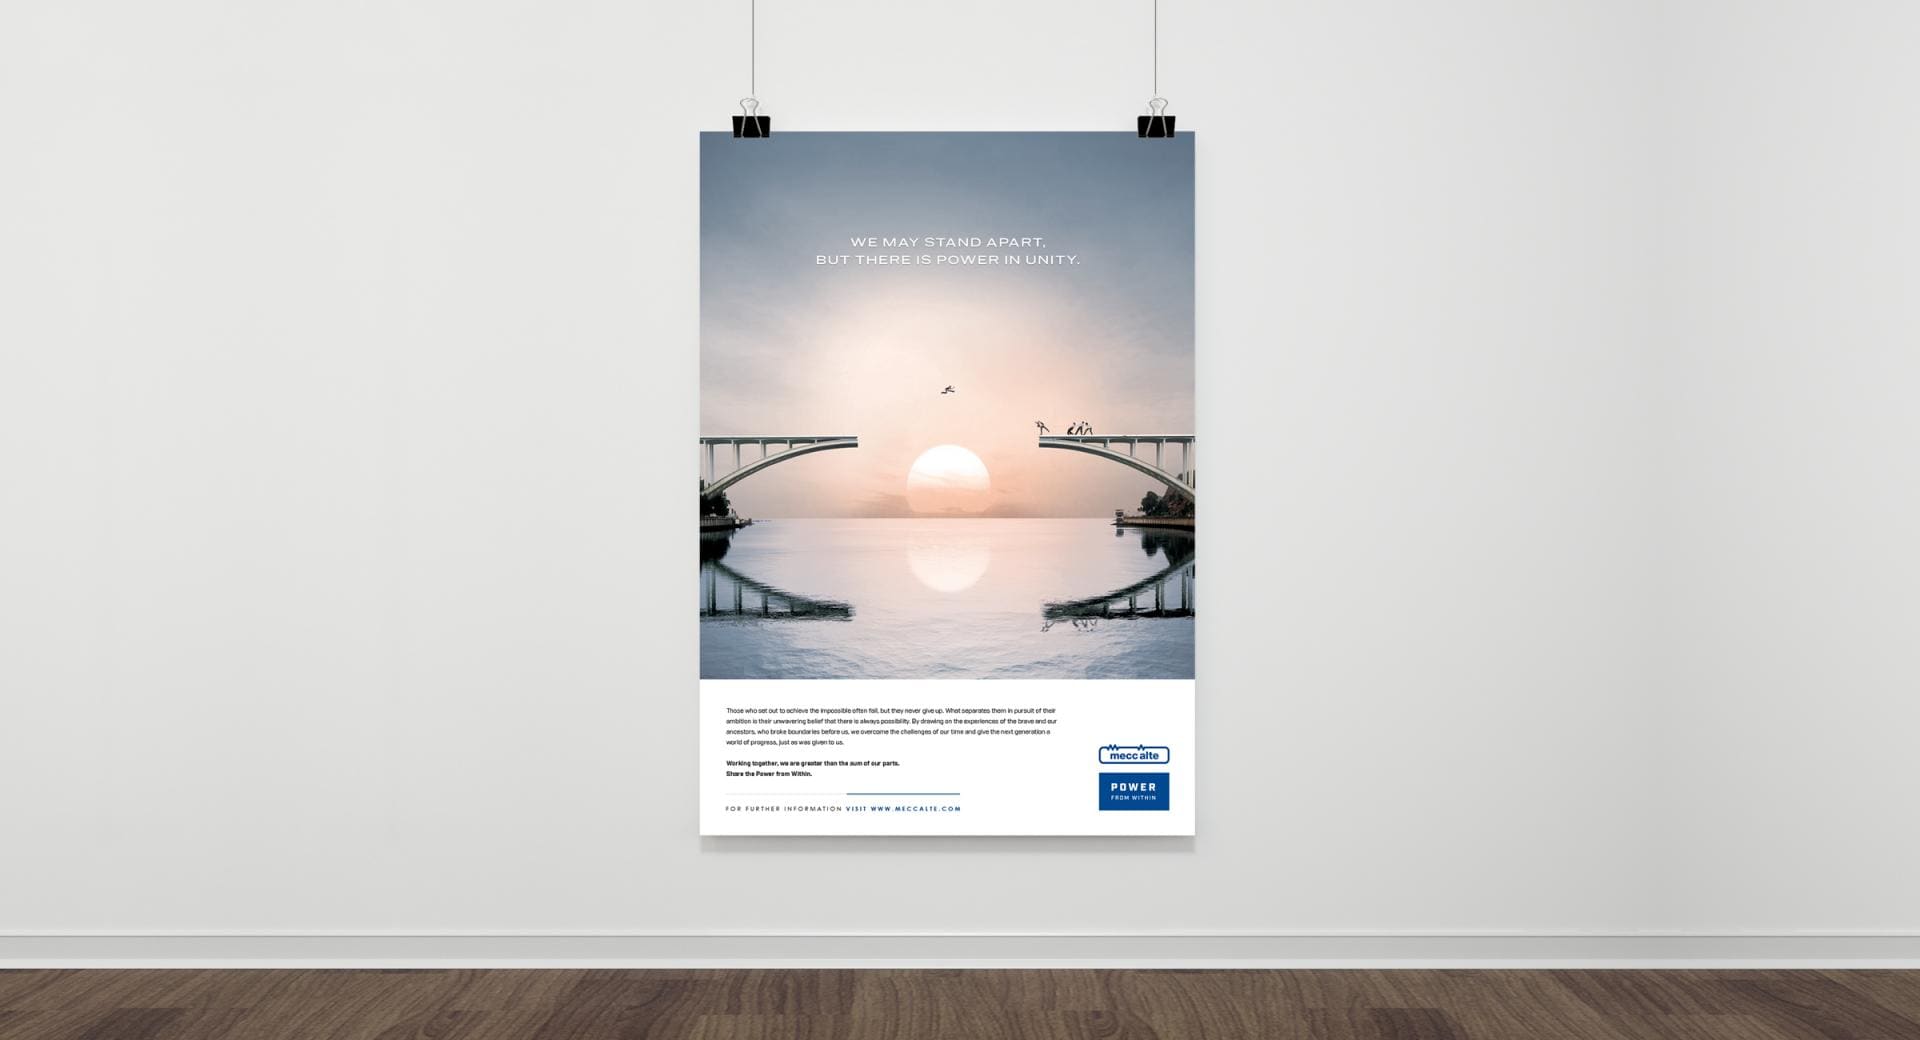 Mecc_Alte_-_Power_from_Within_-_Posters_-_Bridge